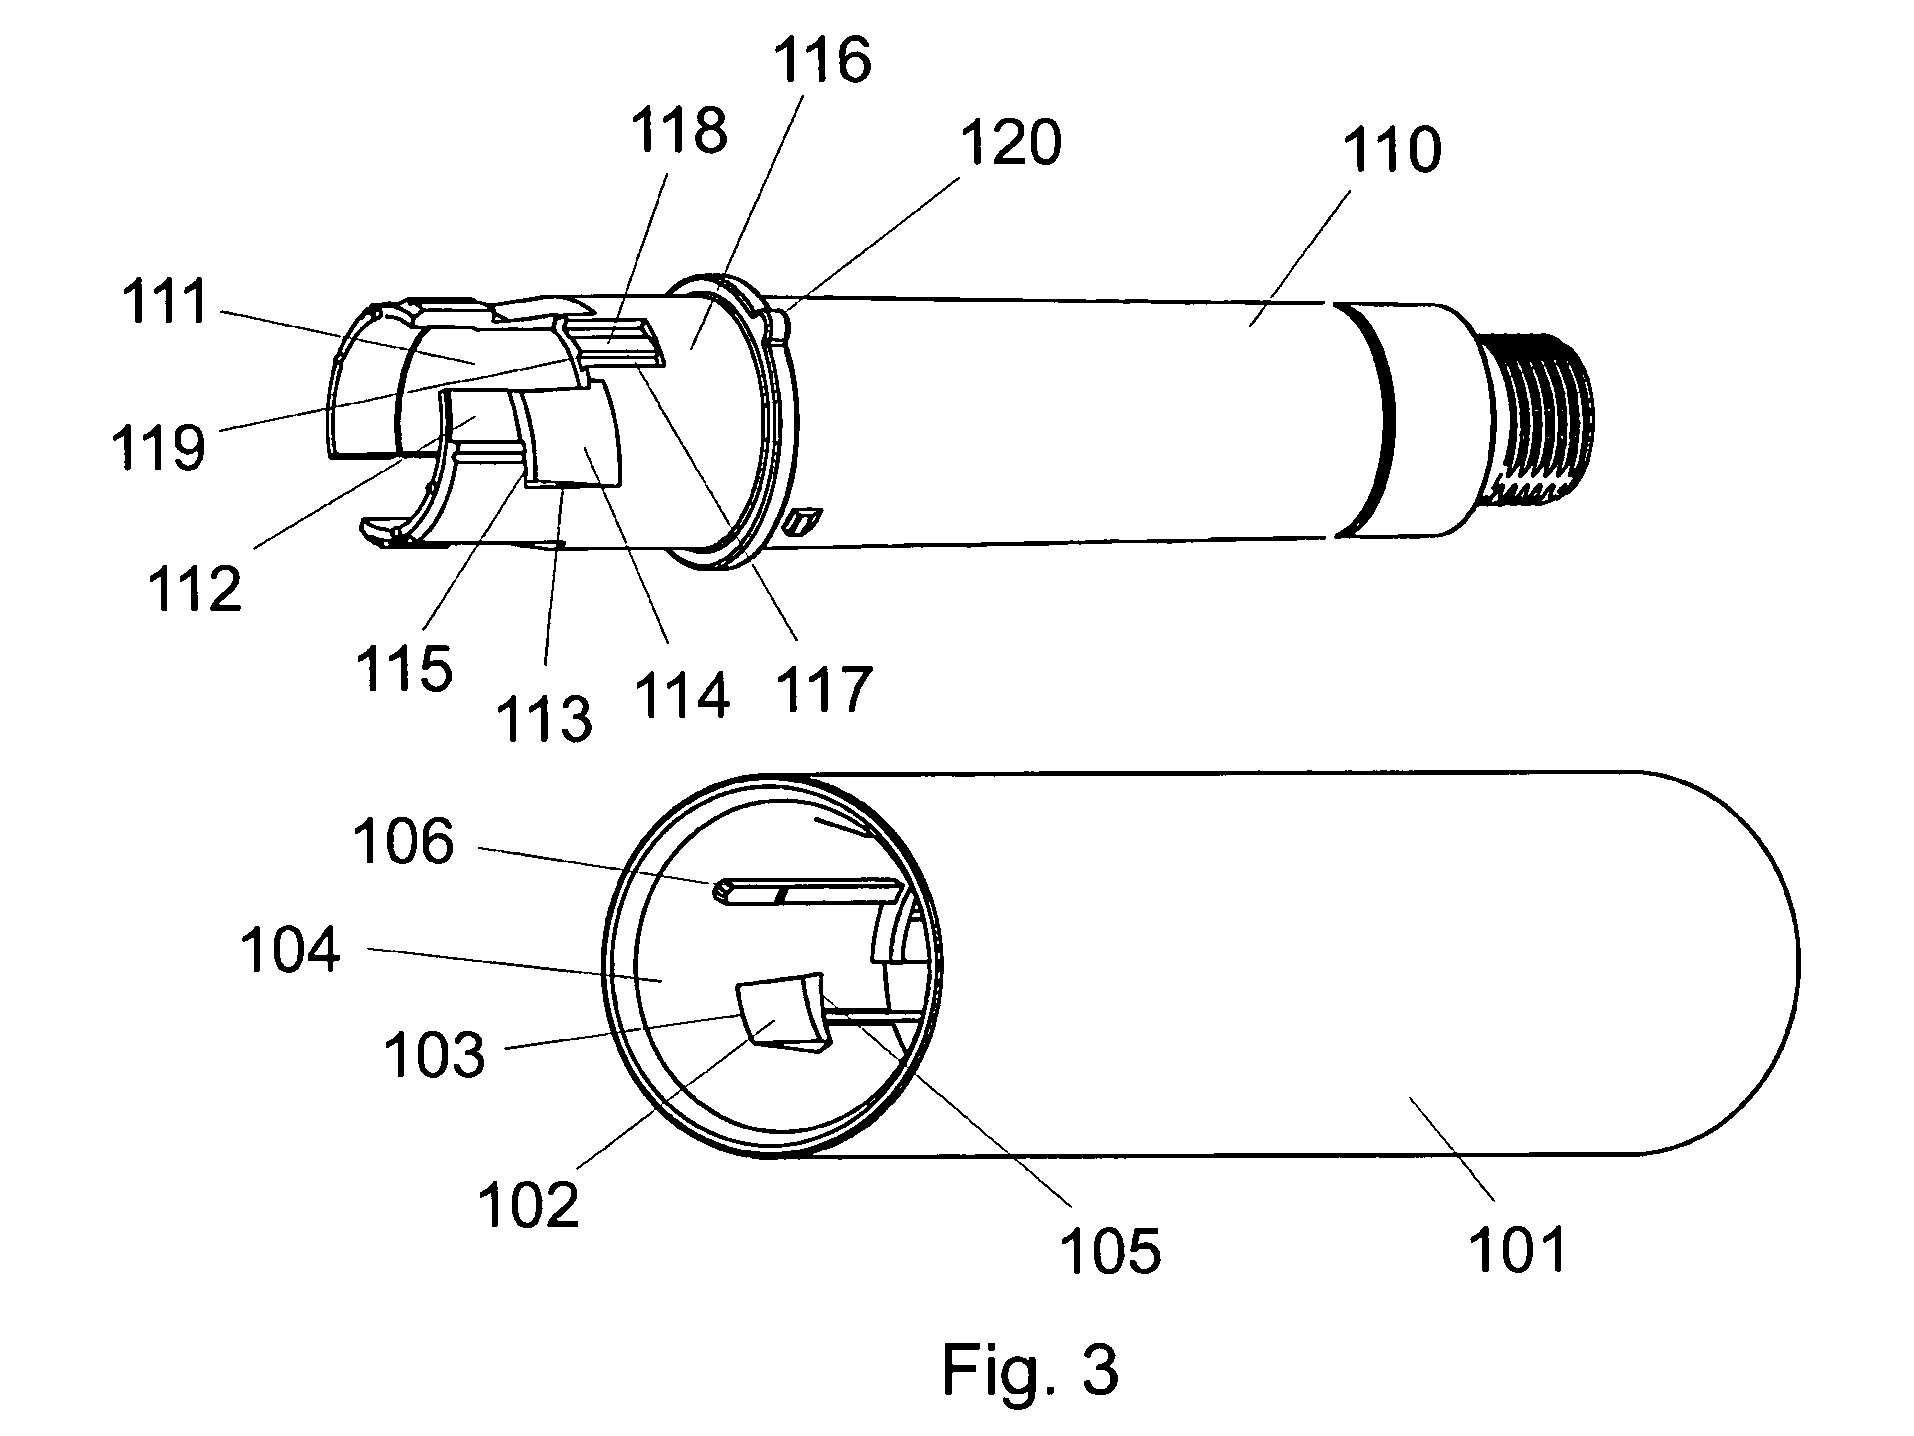 Coupling for injection devices